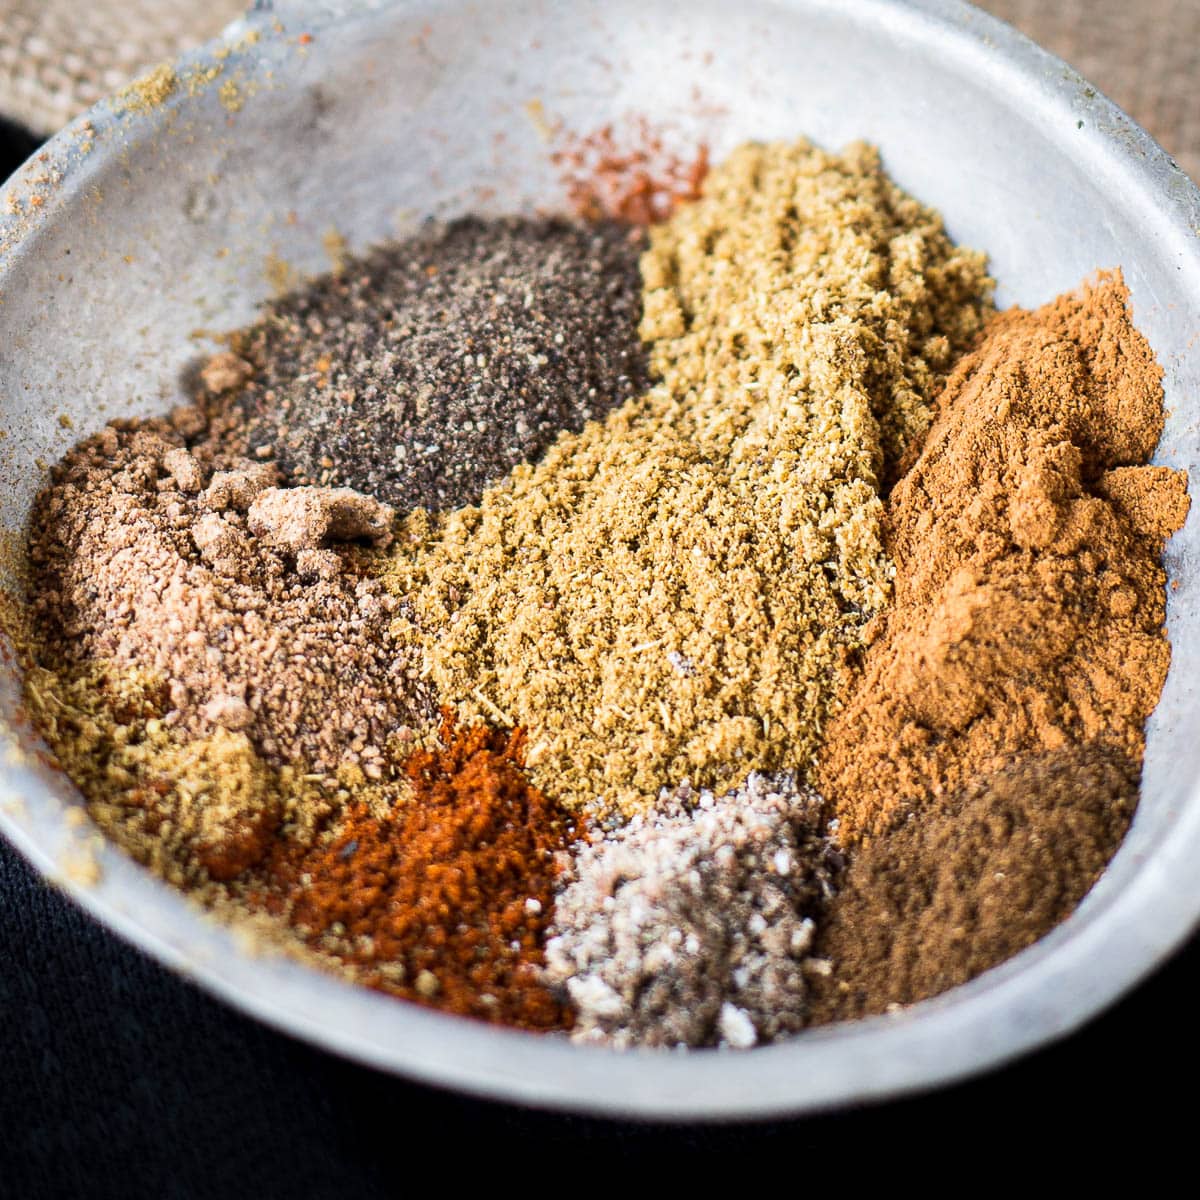 Baharat - Middle Eastern 7 Spice Mix | Wandercooks